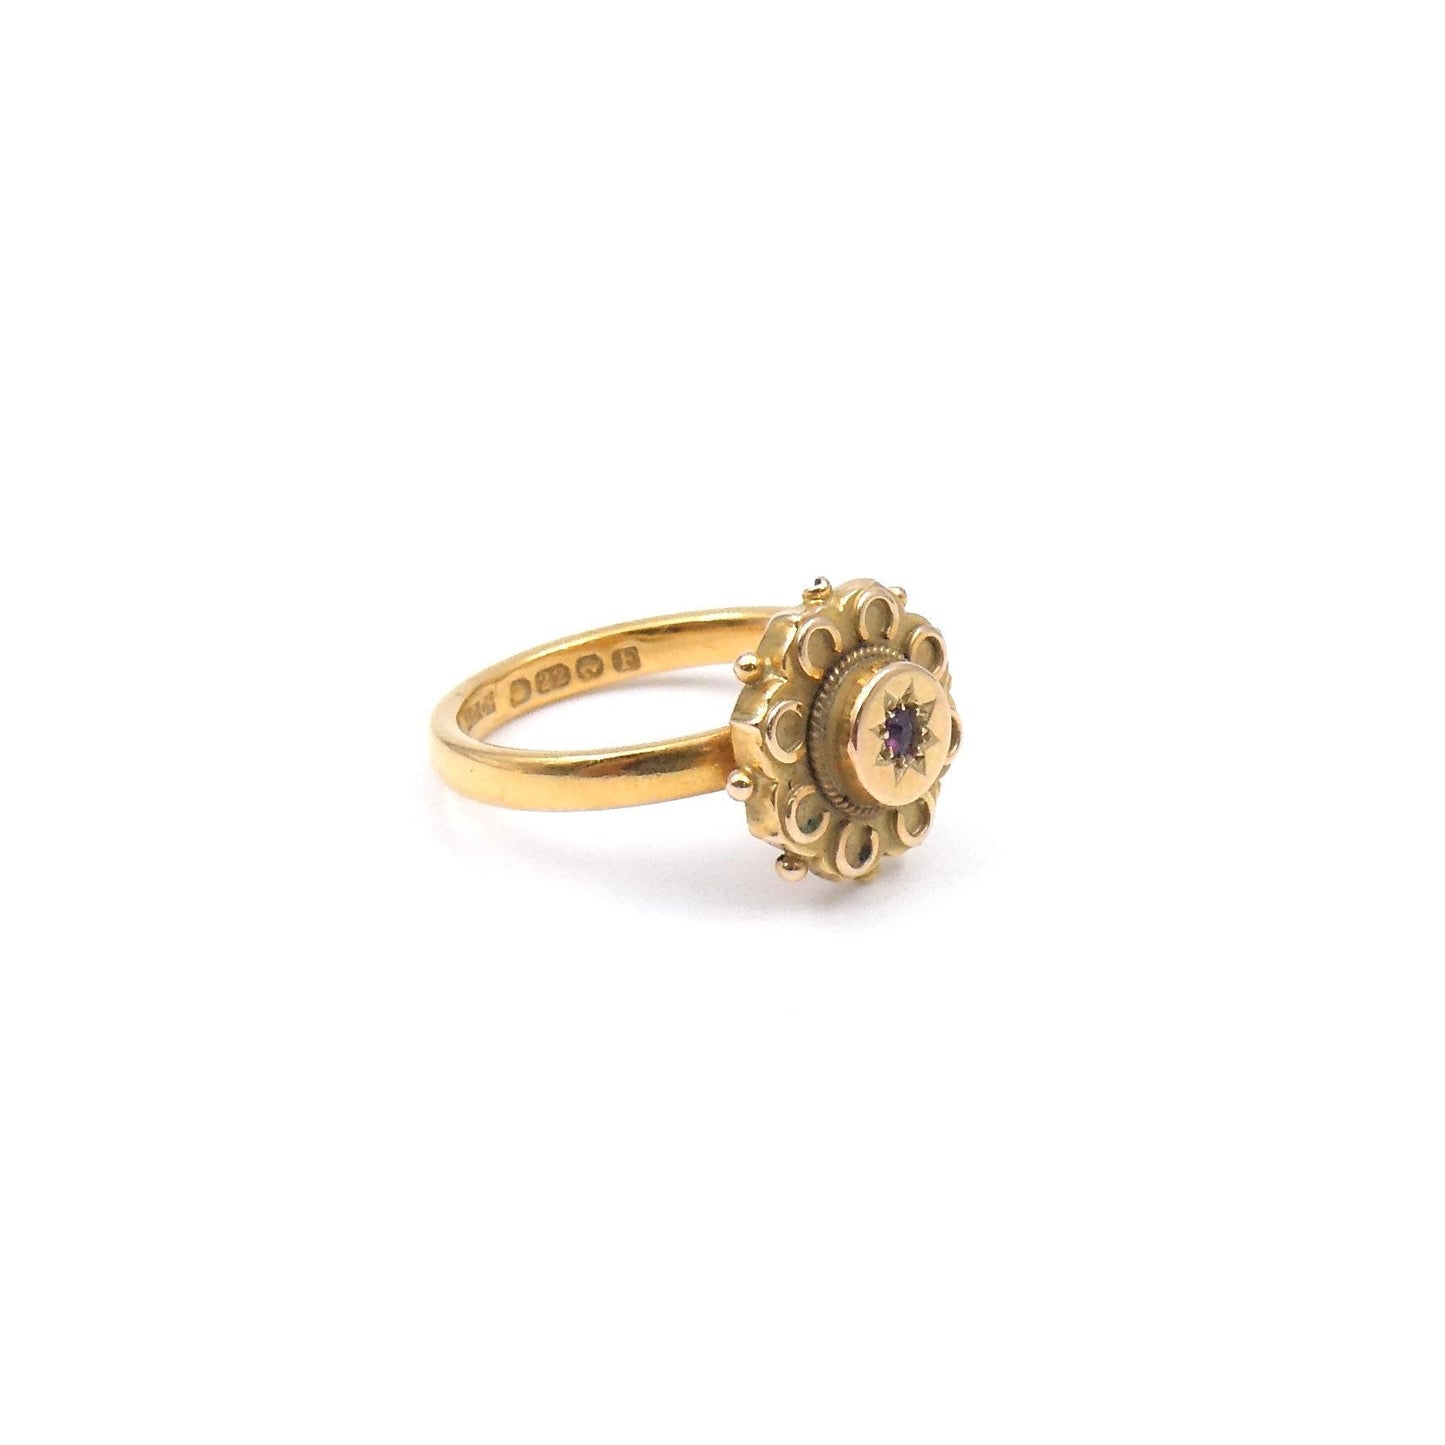 Antique gold ring, Etruscan style ring and a star set ruby hallmarked 18kt and 22kt gold - Collected